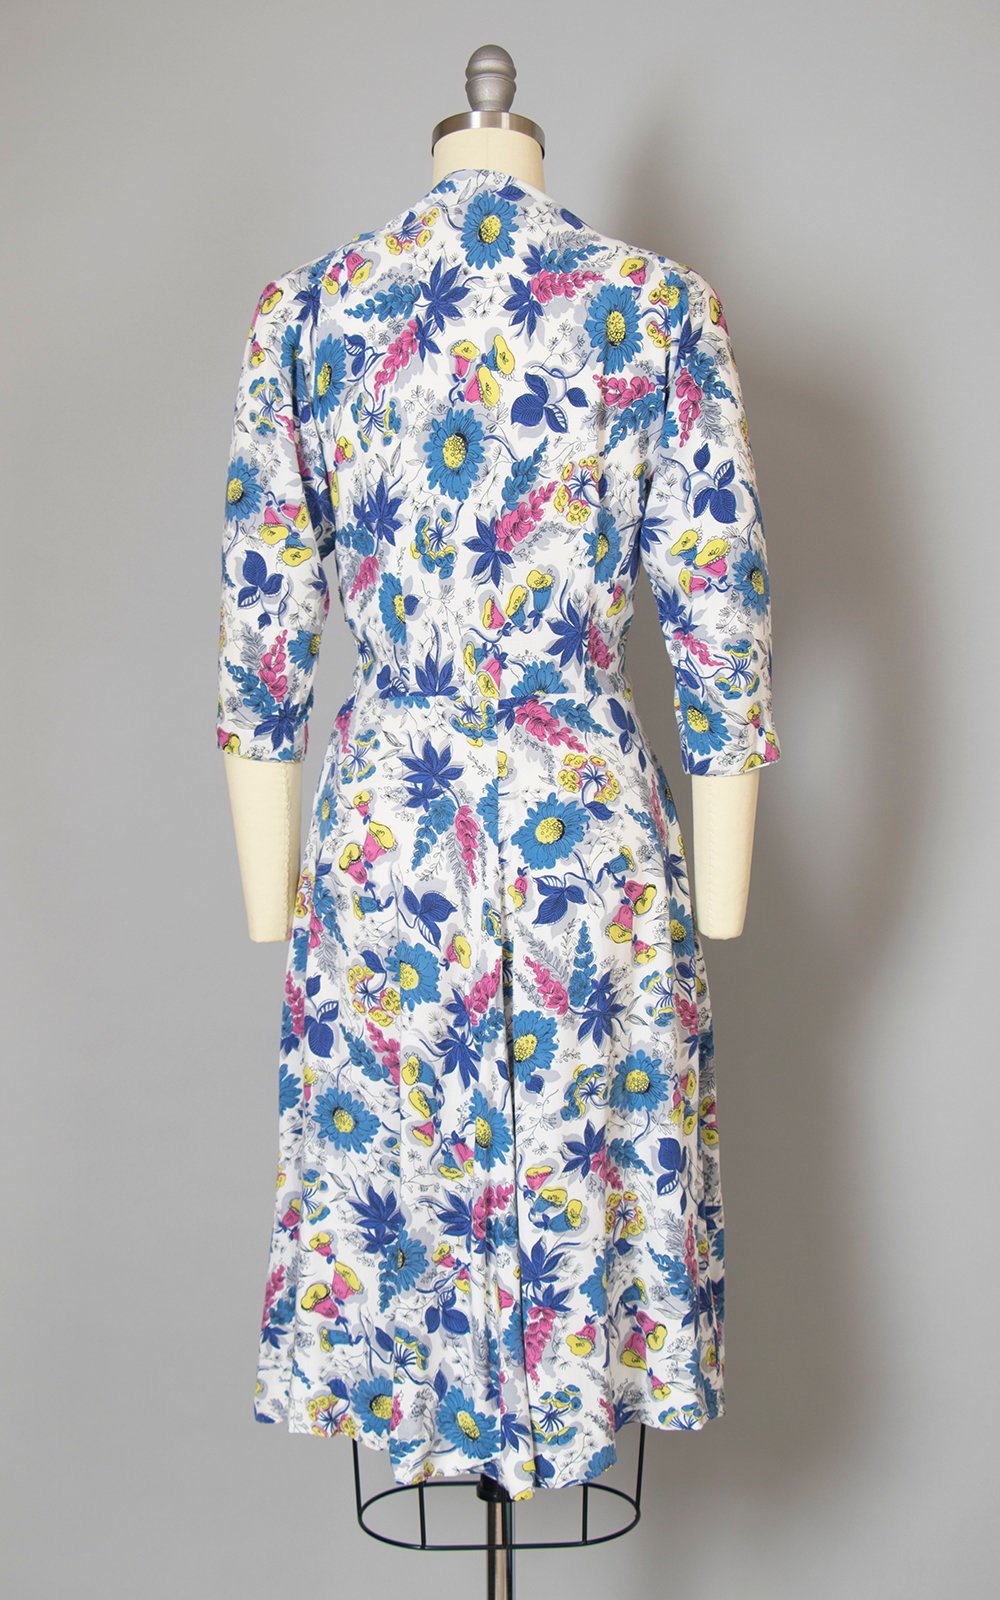 Vintage 1940s Dress | 40s Floral Garden Print Cotton Rayon White Blue Chartreuse Full Skirt Day Dress (small/medium)